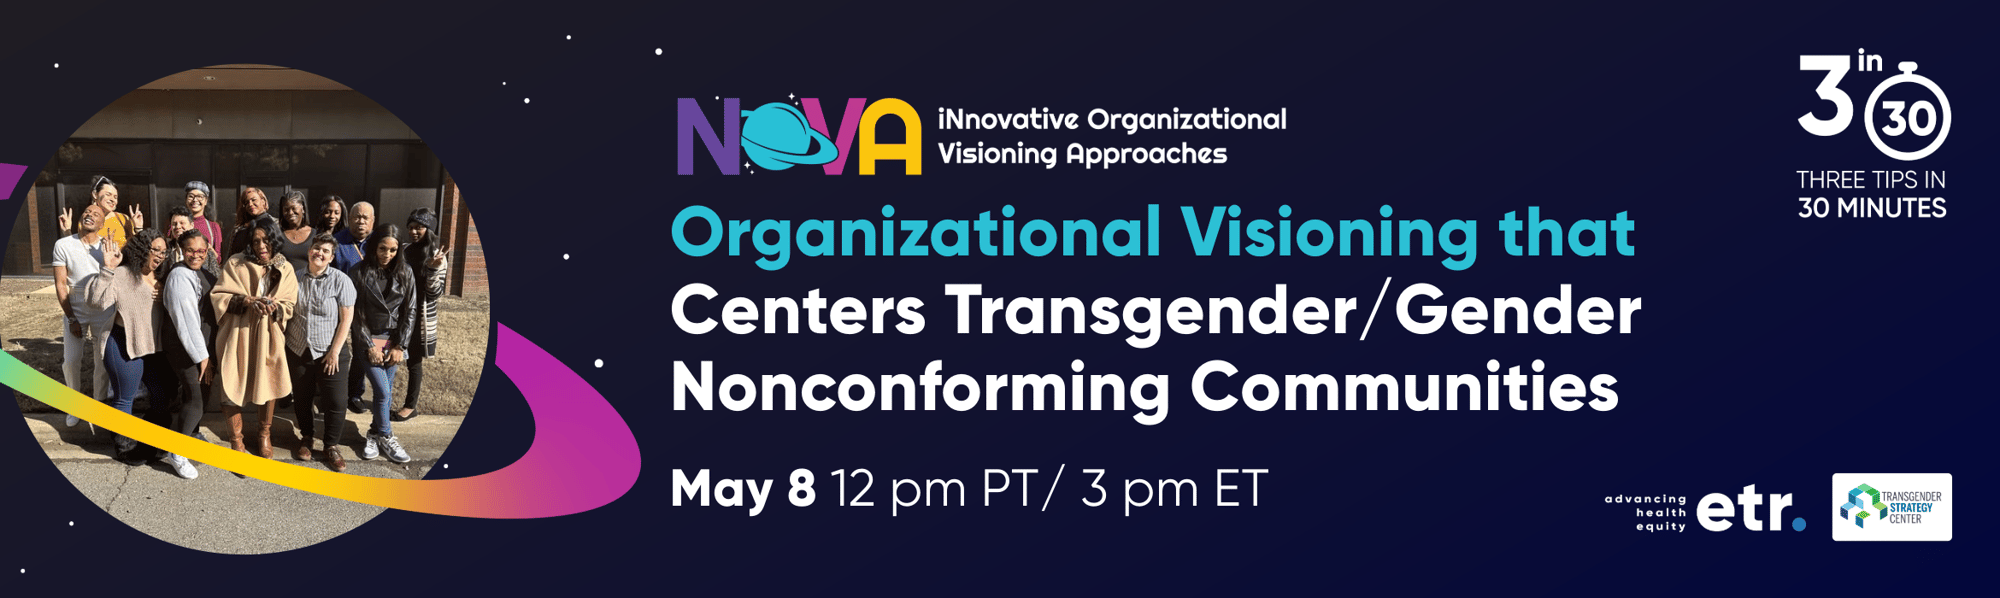 This is a dark blue header with a Saturn shaped frame on the left side of the graphic. In the frame is an image of the NOVA team posing together. Centered on the header is the NOVA logo. Within the logo it reads, “iNnovative Organizational Visioning Approaches.” Below the logo in white and blue text it reads, “Organizational Visioning that Centers Transgender/Gender Nonconforming Communities, May 8, 12 pm PT / 3 pm ET.” To the right of the text is the 3 in 30 logo that reads, "3 in 30 THREE TIPS IN 30 MINUTES".  Below the logo is the ETR logo and the Transgender Strategy Center logo.